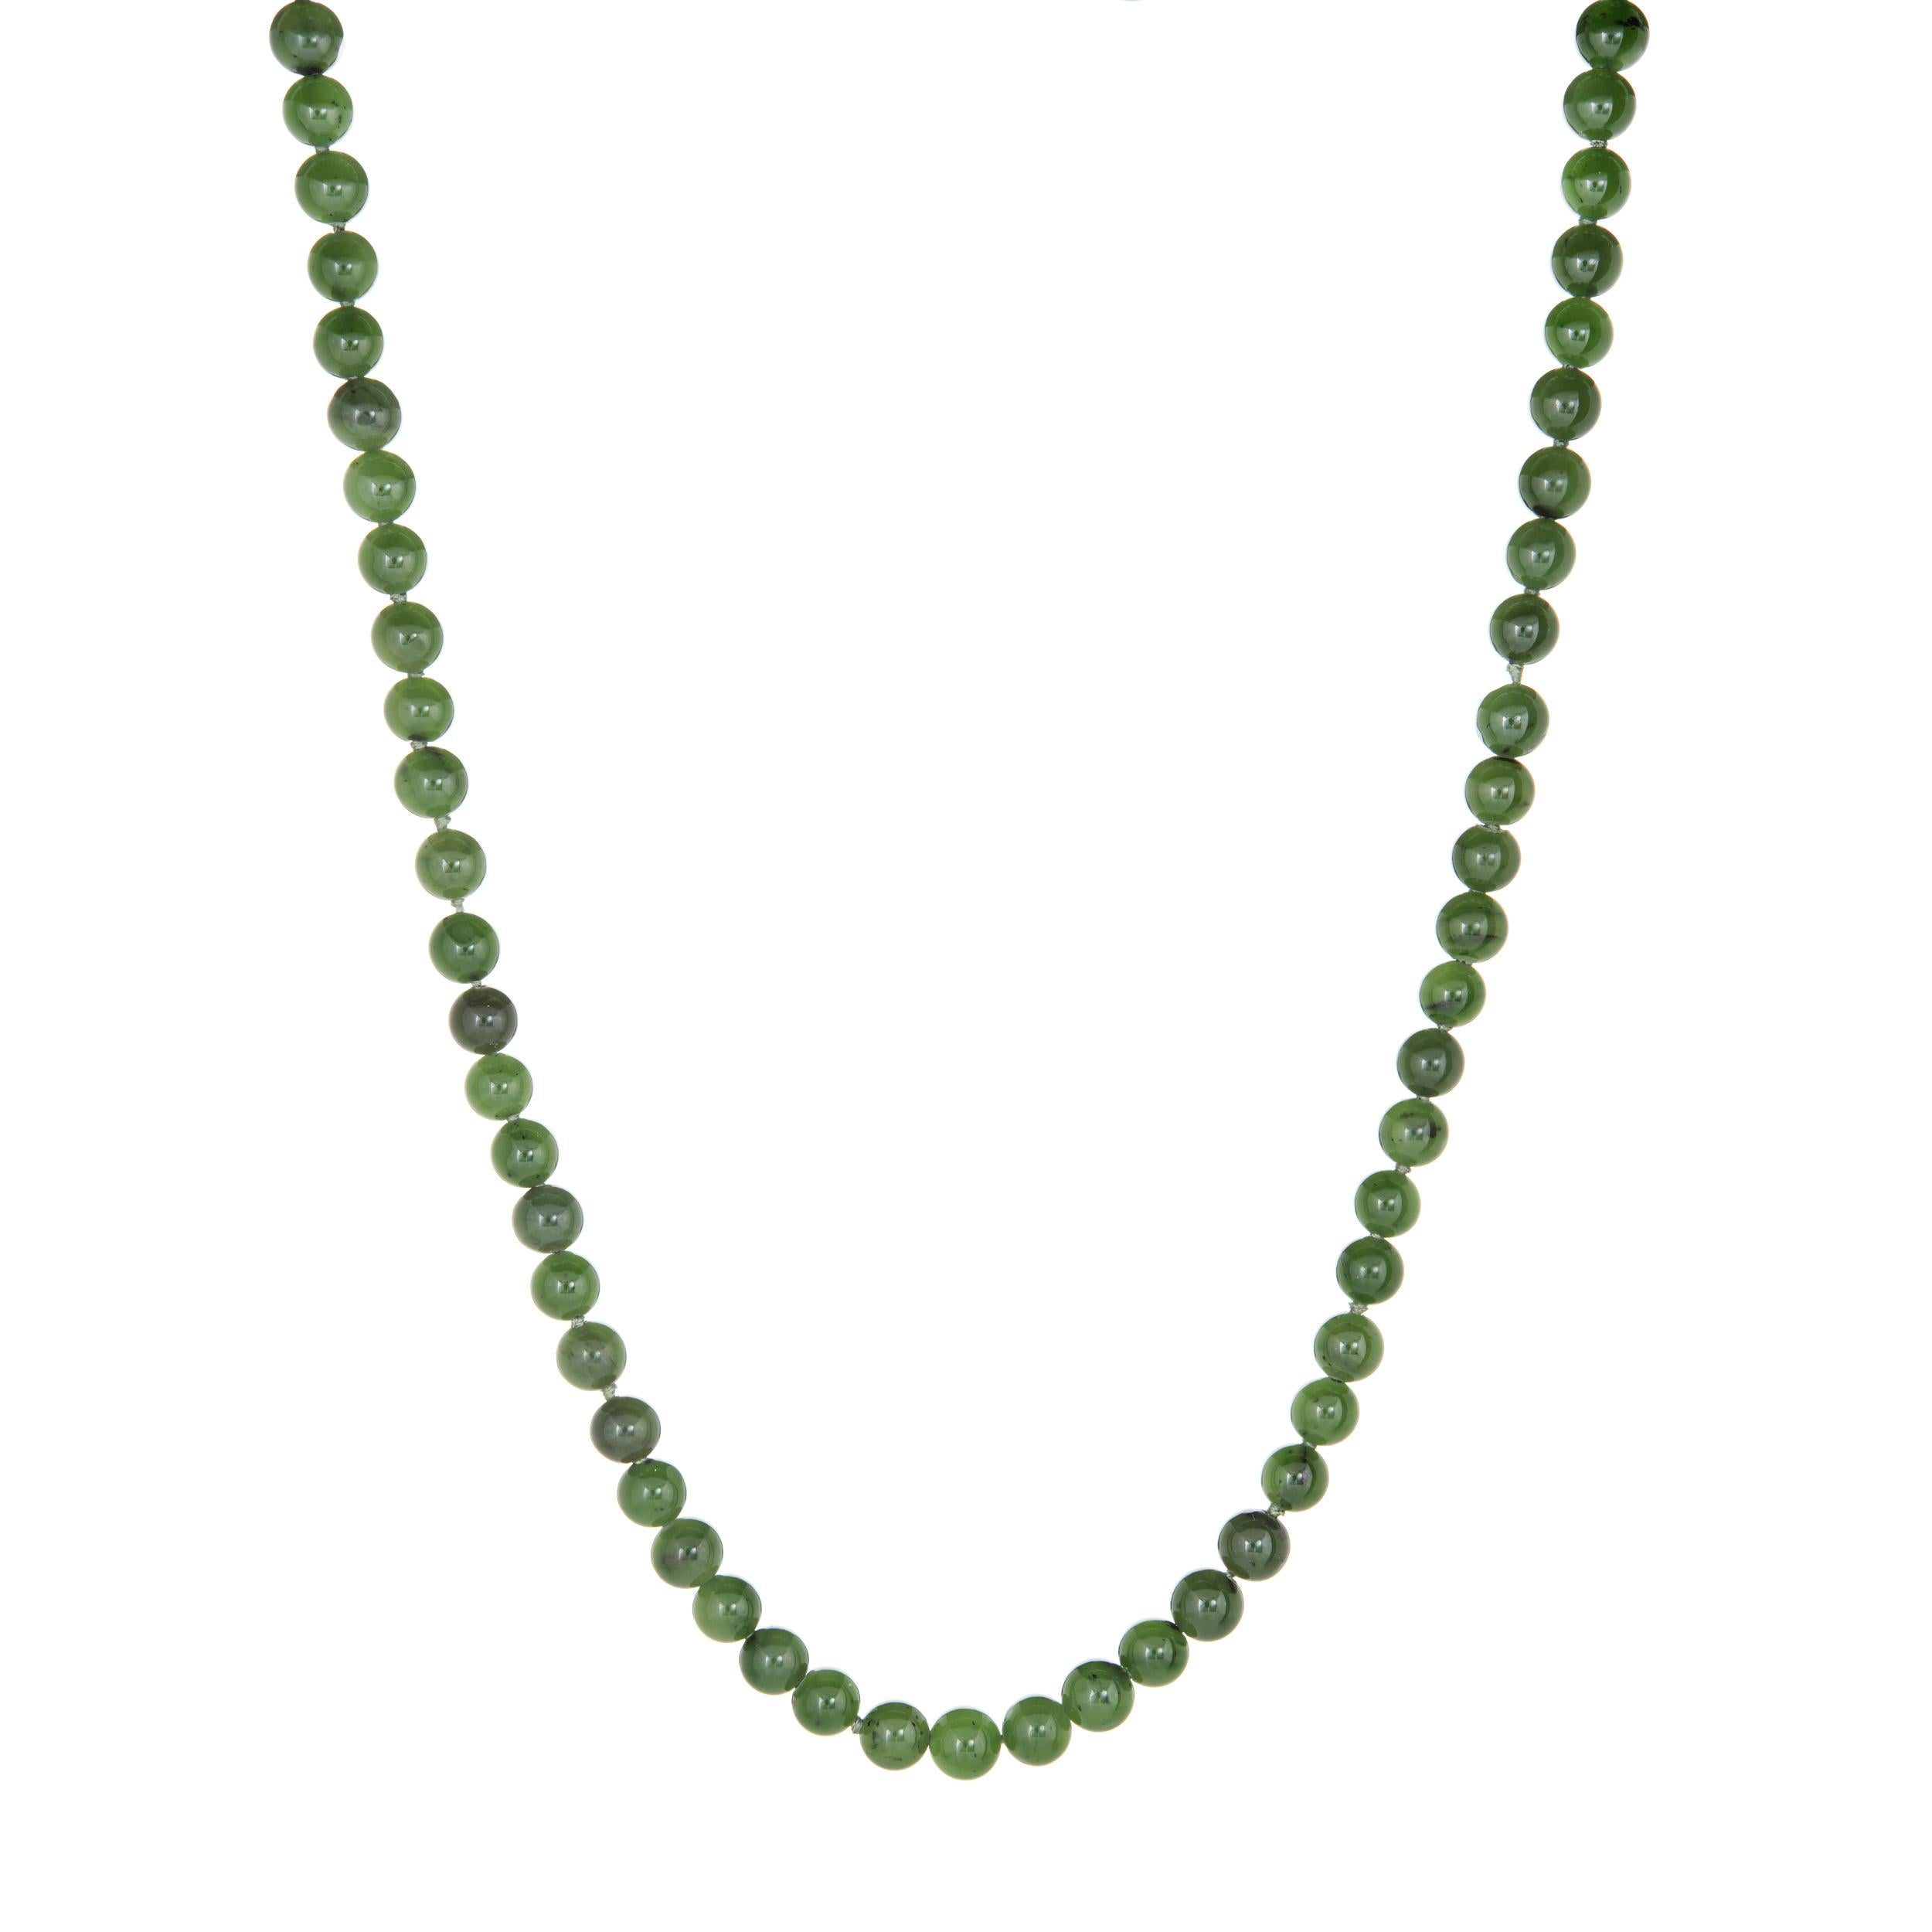 Finely detailed vintage nephrite jade necklace, finished with a 14k yellow gold clasp (circa 1950s to 1960s). 

Jade beads are uniform in size and measure 7.5mm. The jade is in very good condition and free of cracks or chips. The jade beads are